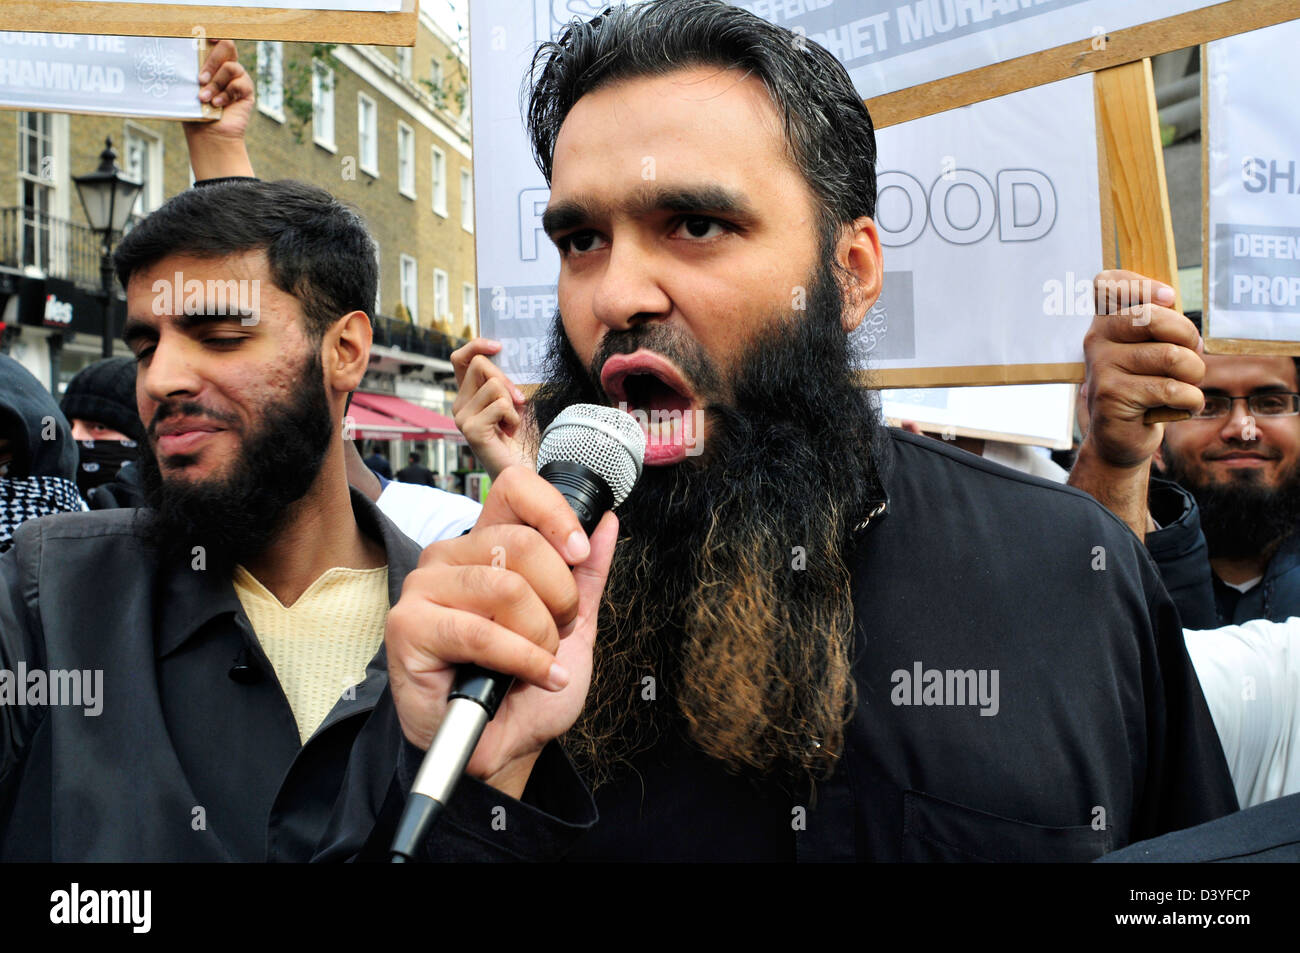 A bearded man shouts slogans during a protest against the Prophet Mohammad cartoons. London, UK Stock Photo